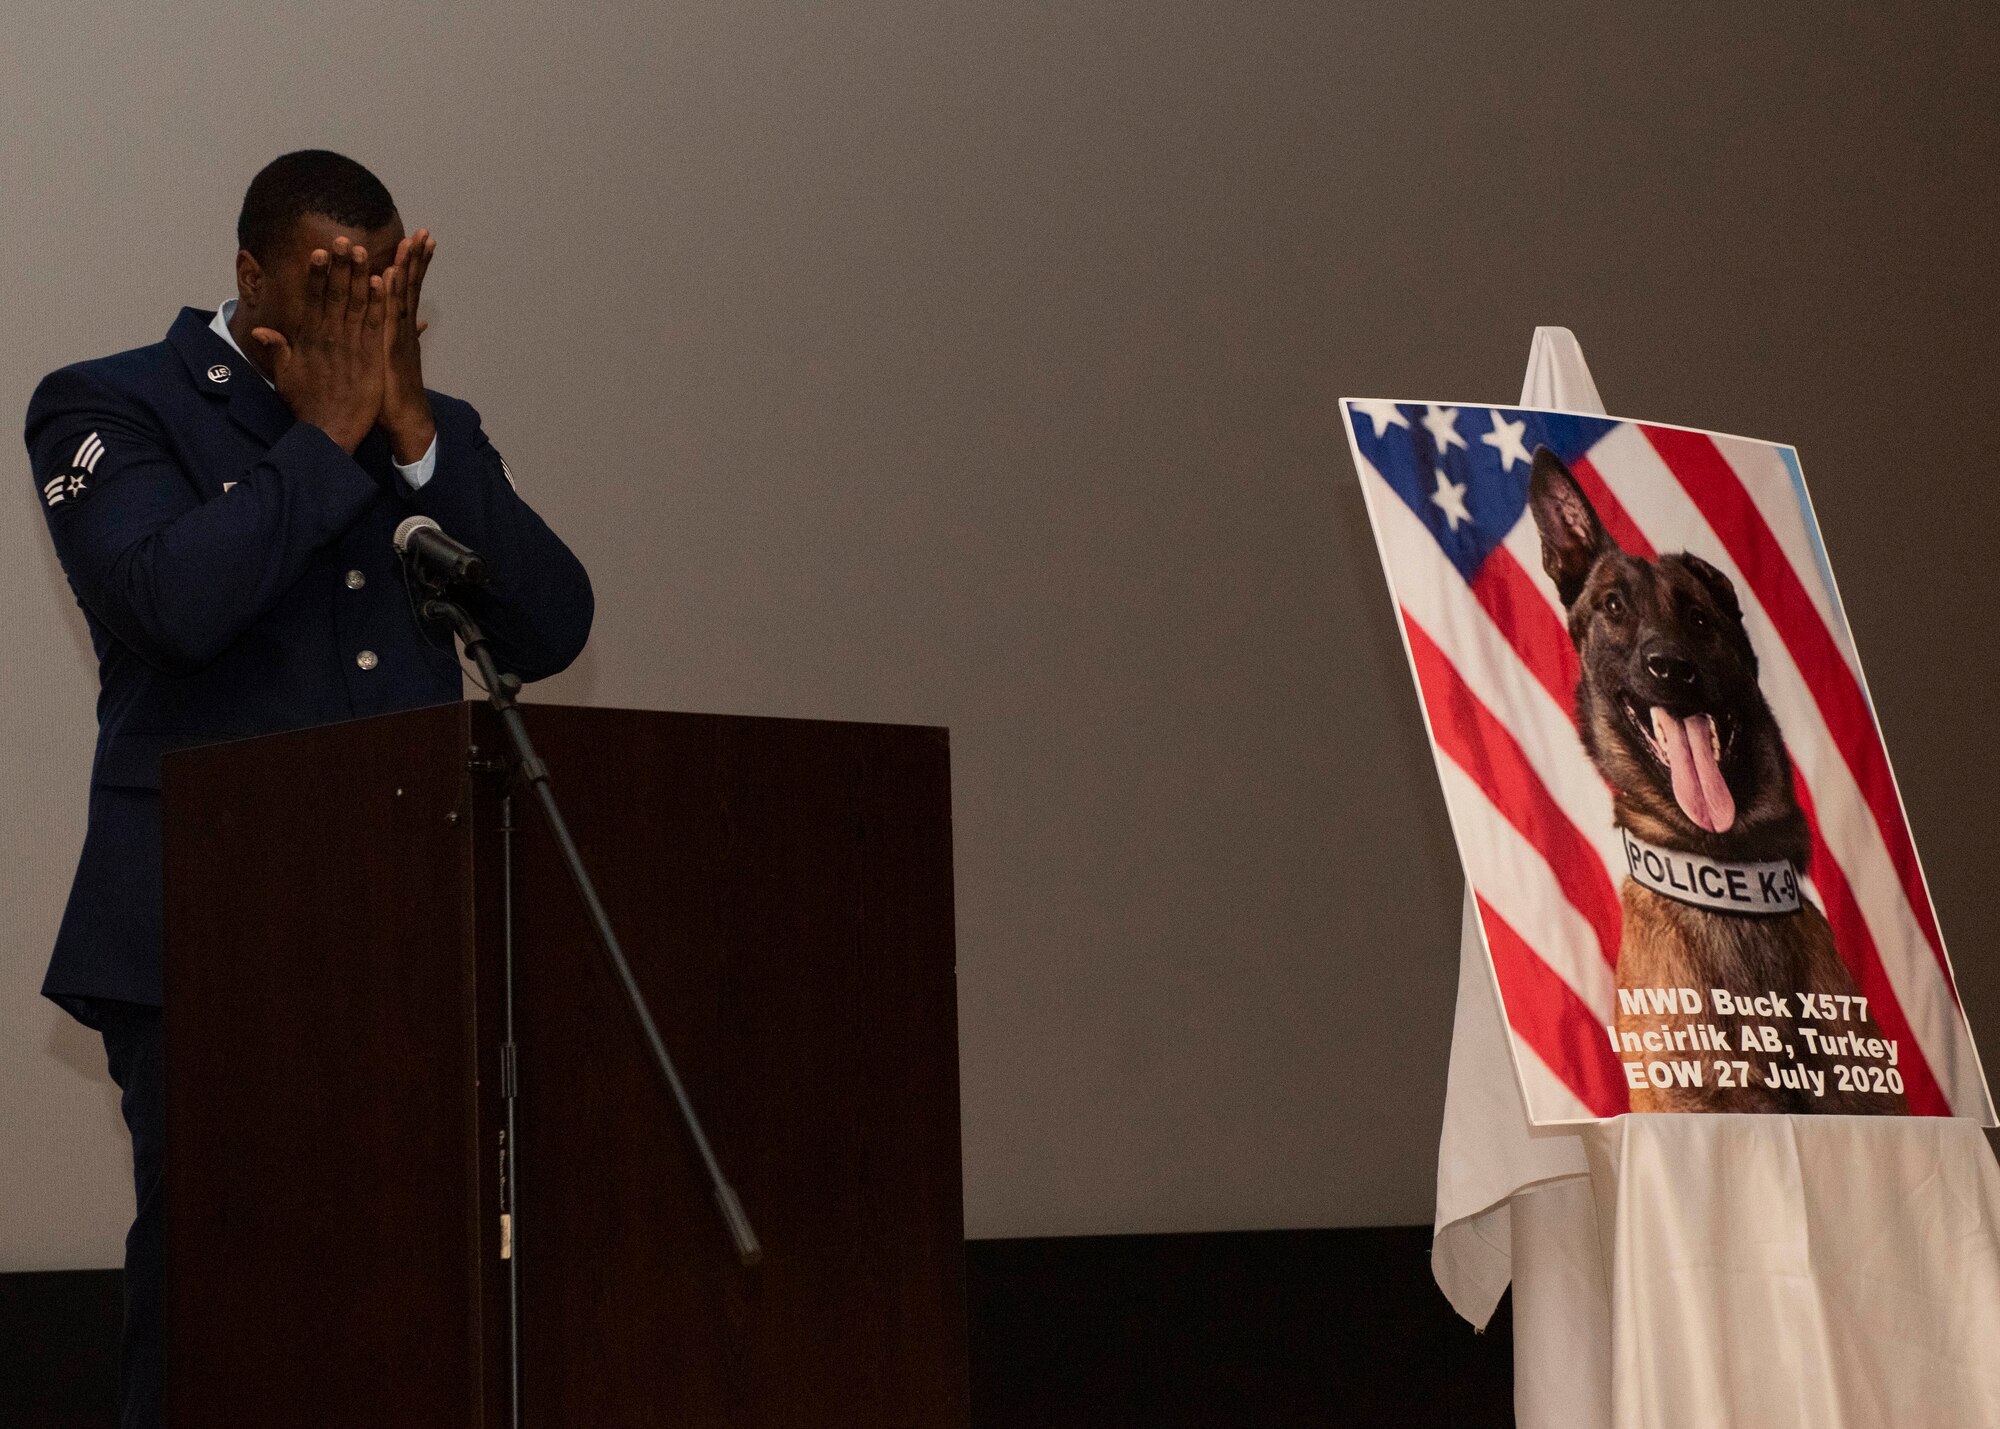 U.S. Senior Airman Antoine Carr, 39th Security Forces Squadron military working dog handler, wipe tears away while at a memorial ceremony, Aug. 5, 2020, at Incirlik Air Base, Turkey